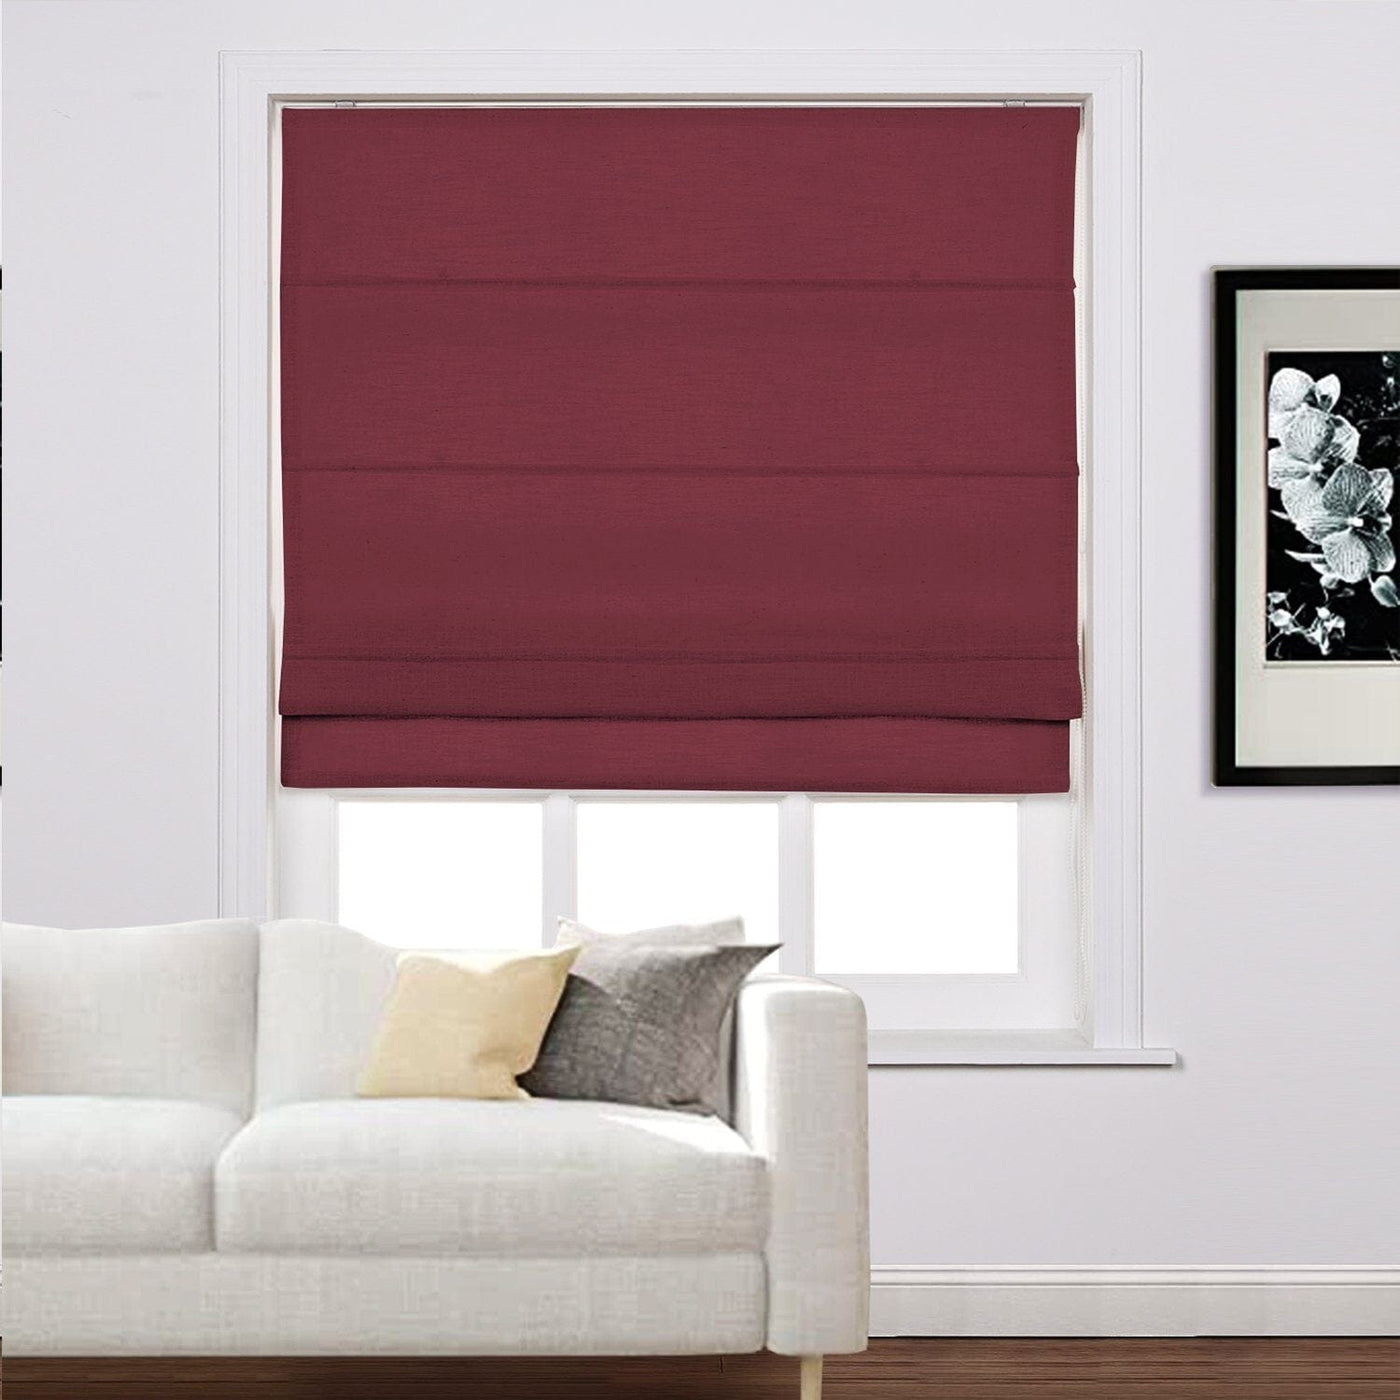 LIZ Linen Customized Roman Shade, Canvas Roman Shade with Loop Control, Kitchen Window Door Roman Shade, Install Hardware Included TWOPAGES CURTAINS Burgundy Red 1908-22 